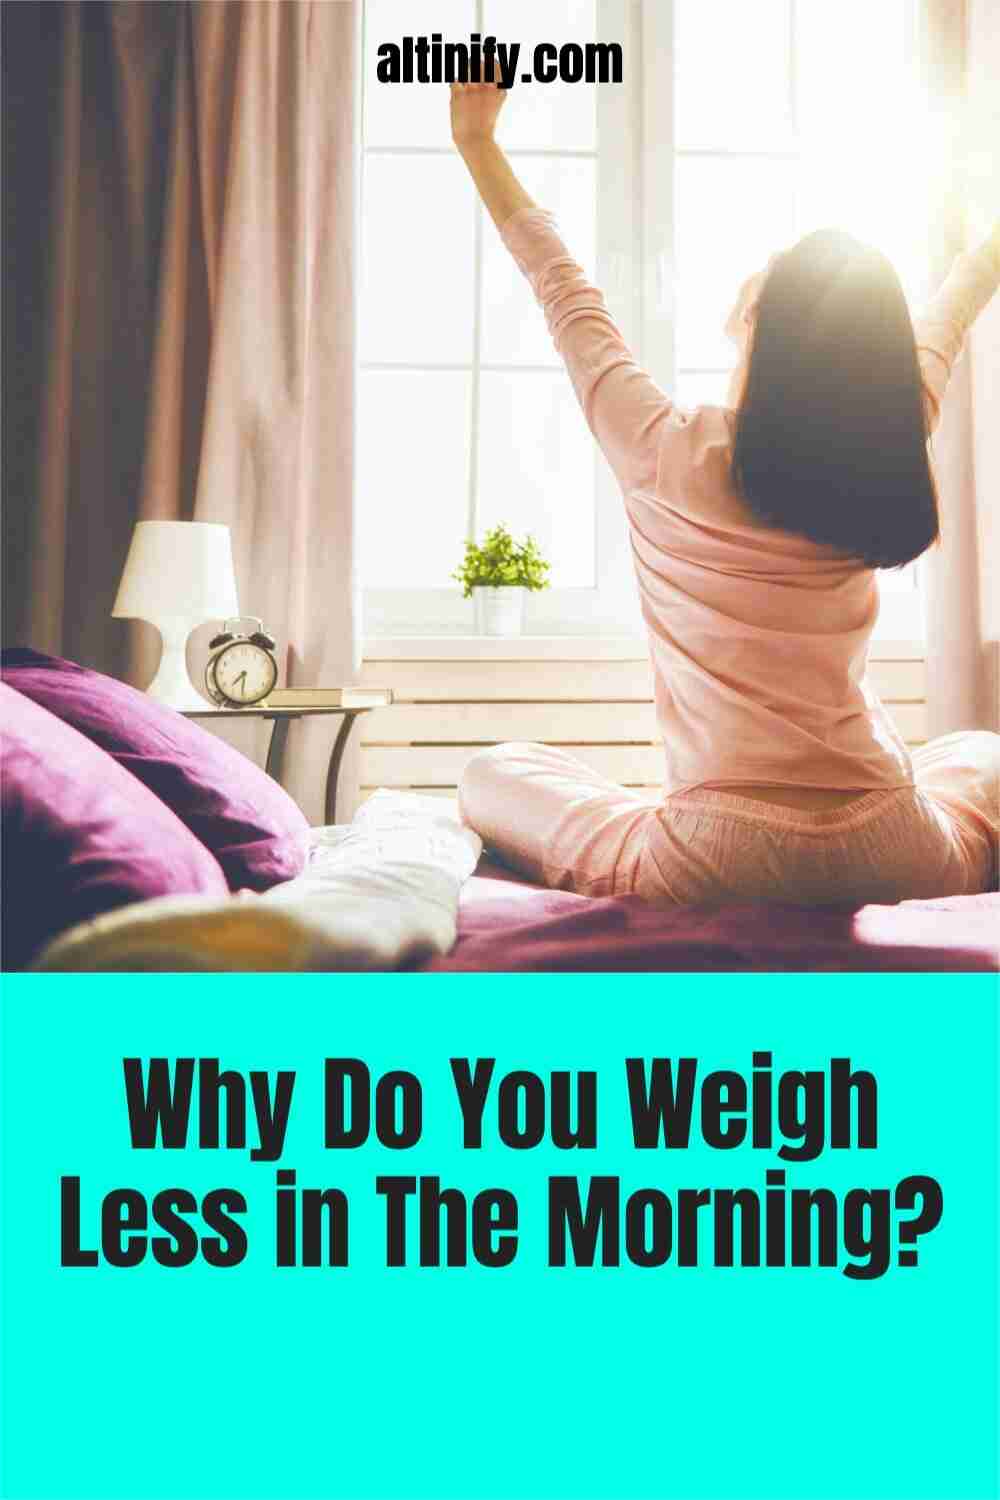 Why Do I Weigh Less in The Morning?